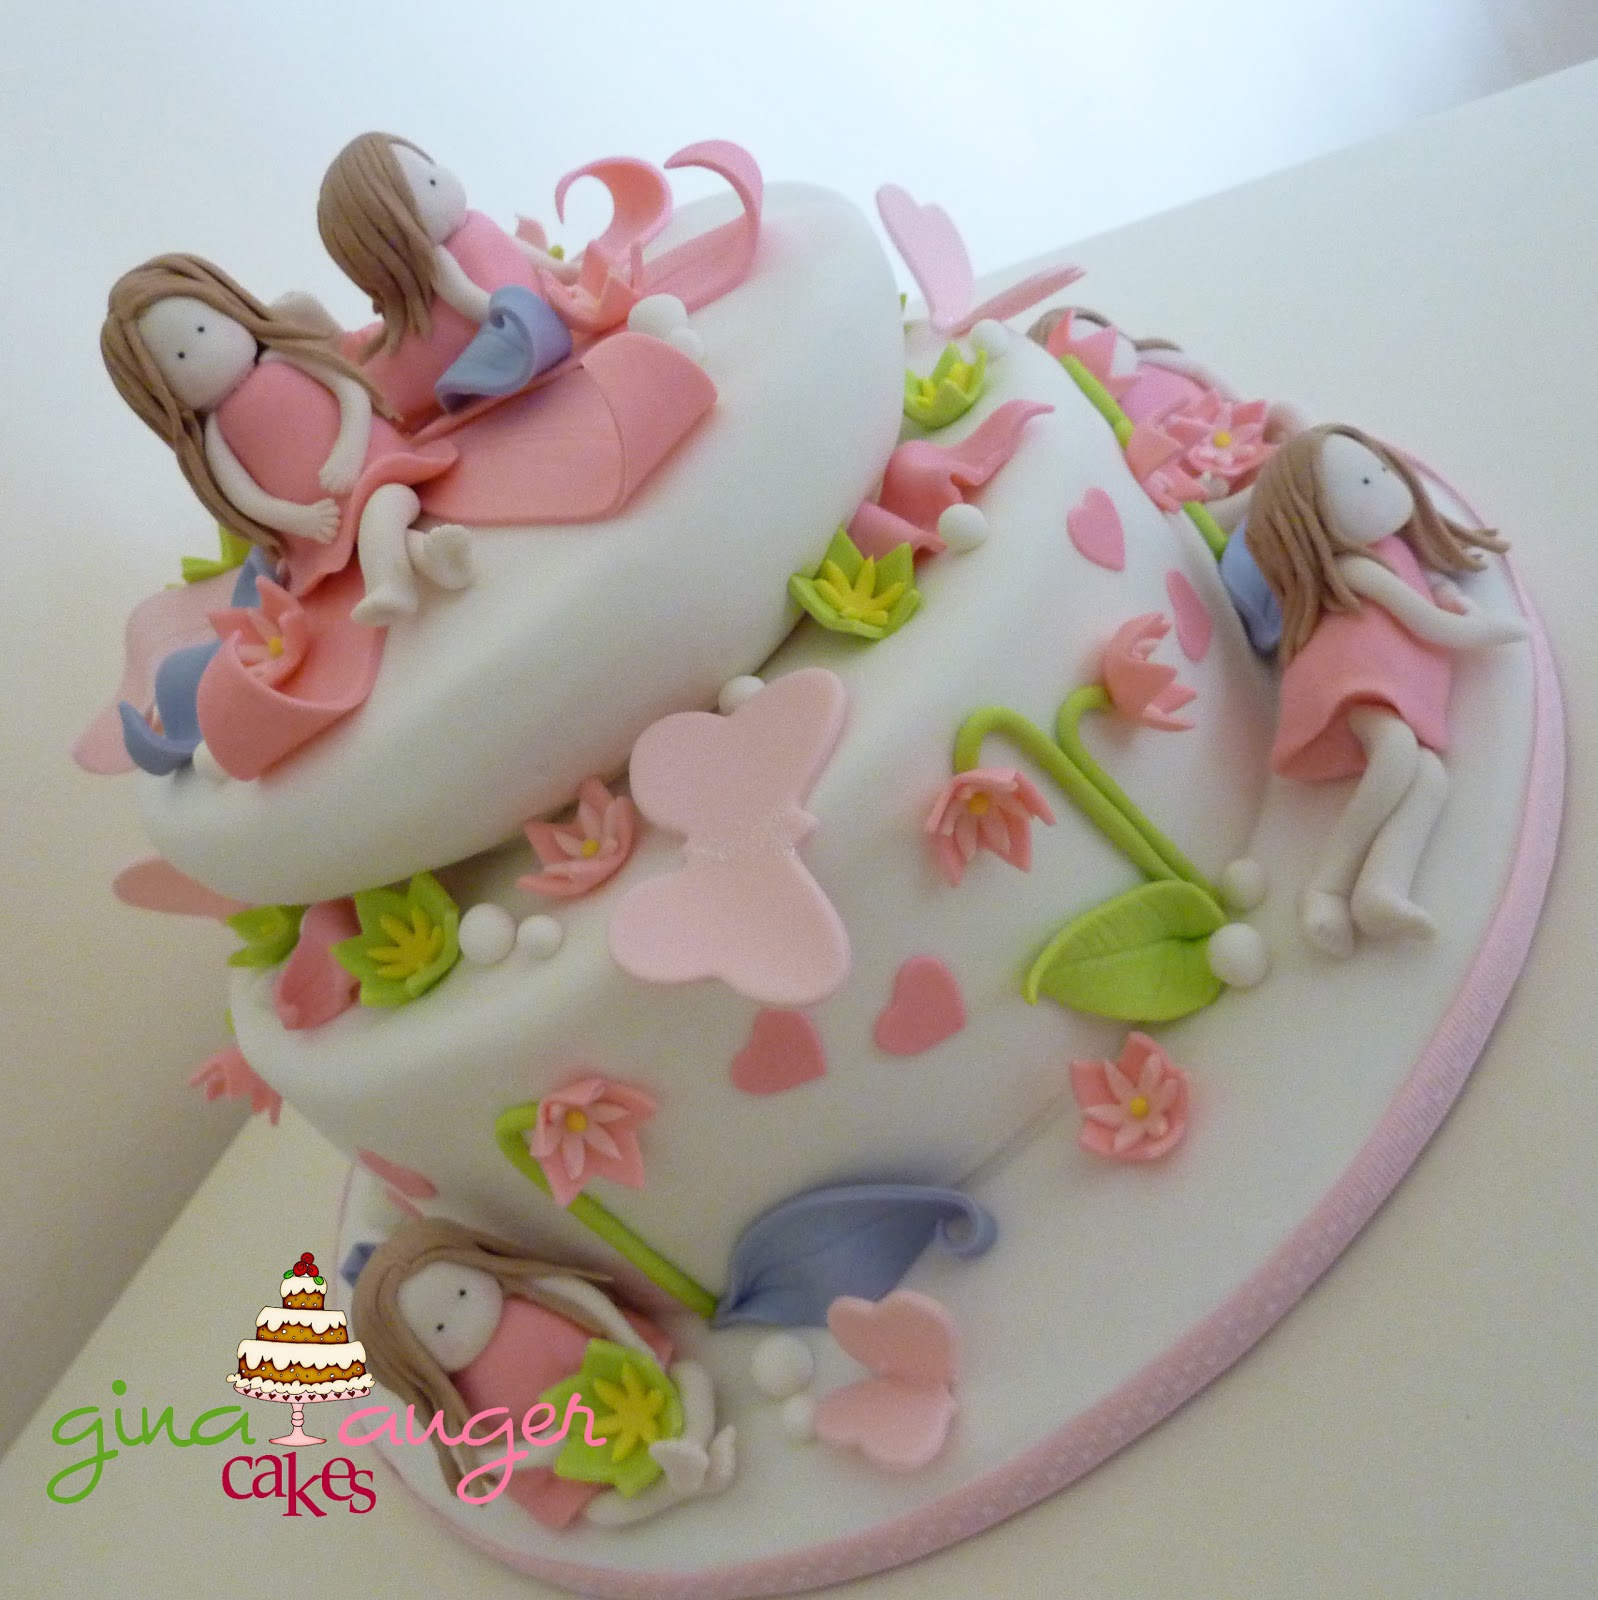 Top 77 Photos Of Cakes For Birthday Girls | Cakes Gallery